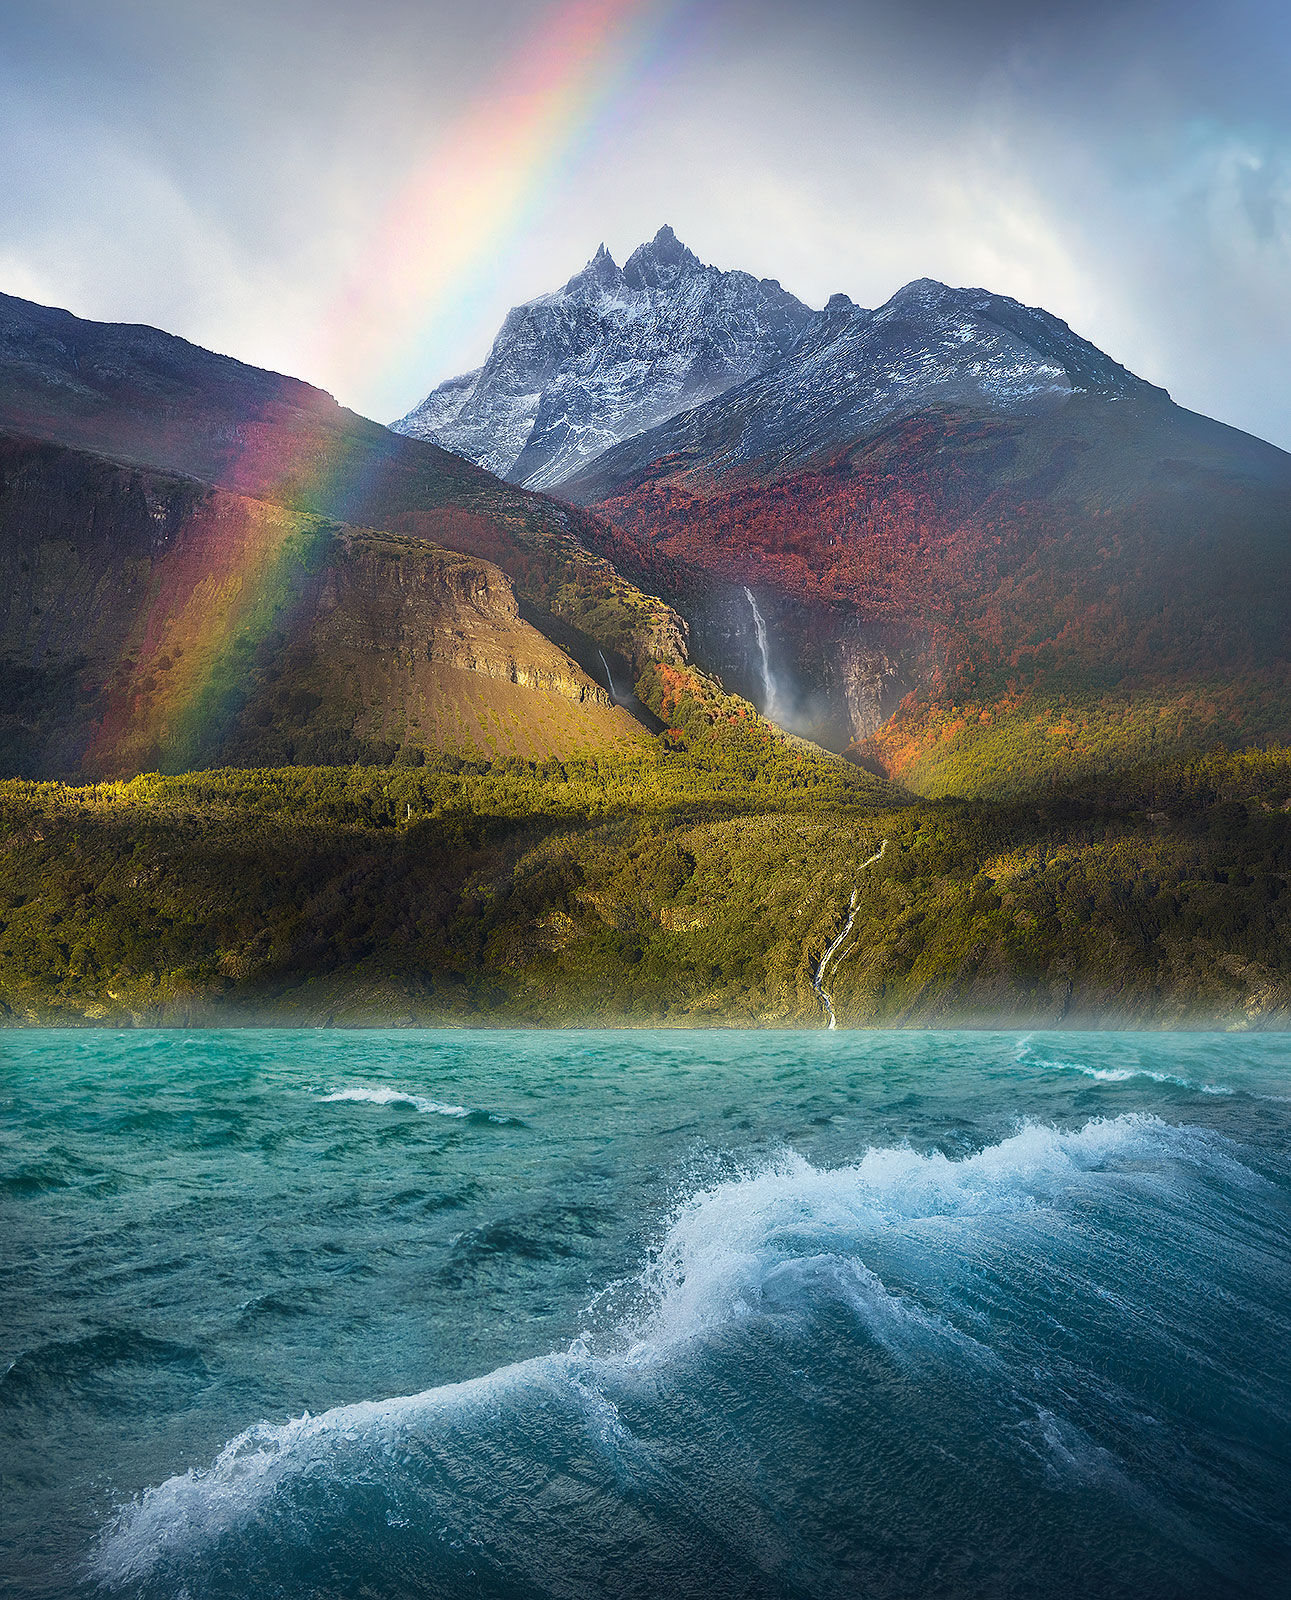 A rare image of a rainbow over huge waterfalls and windy fjord waters in Patagonia